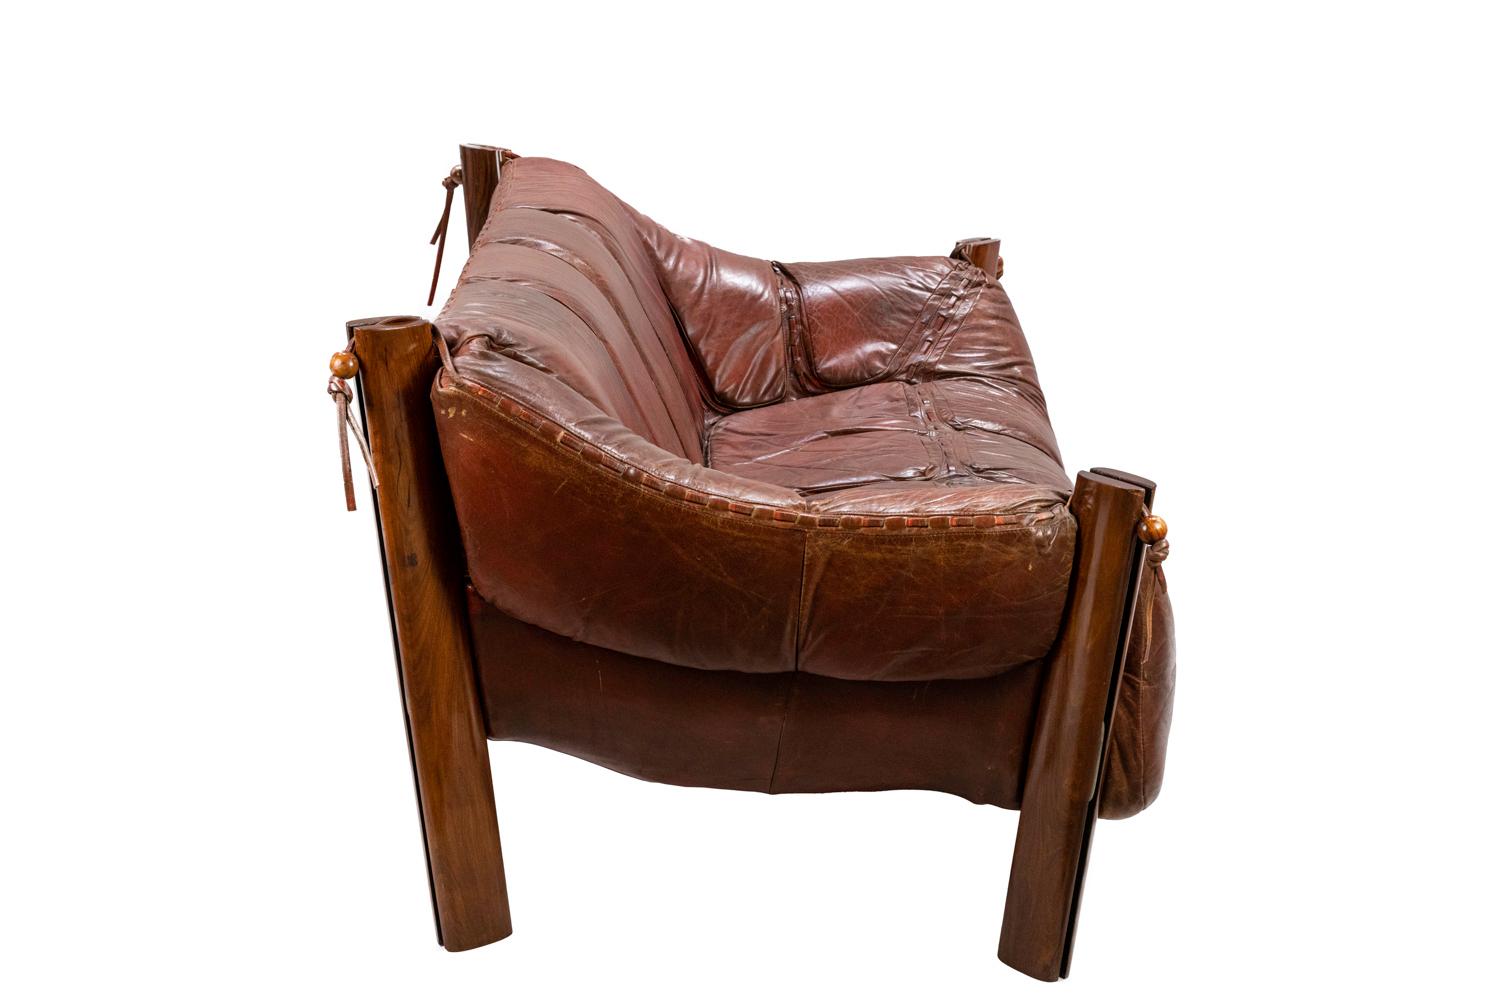 European Percival Lafer, Sofa MP-211 in Rosewood and Leather, 1970s